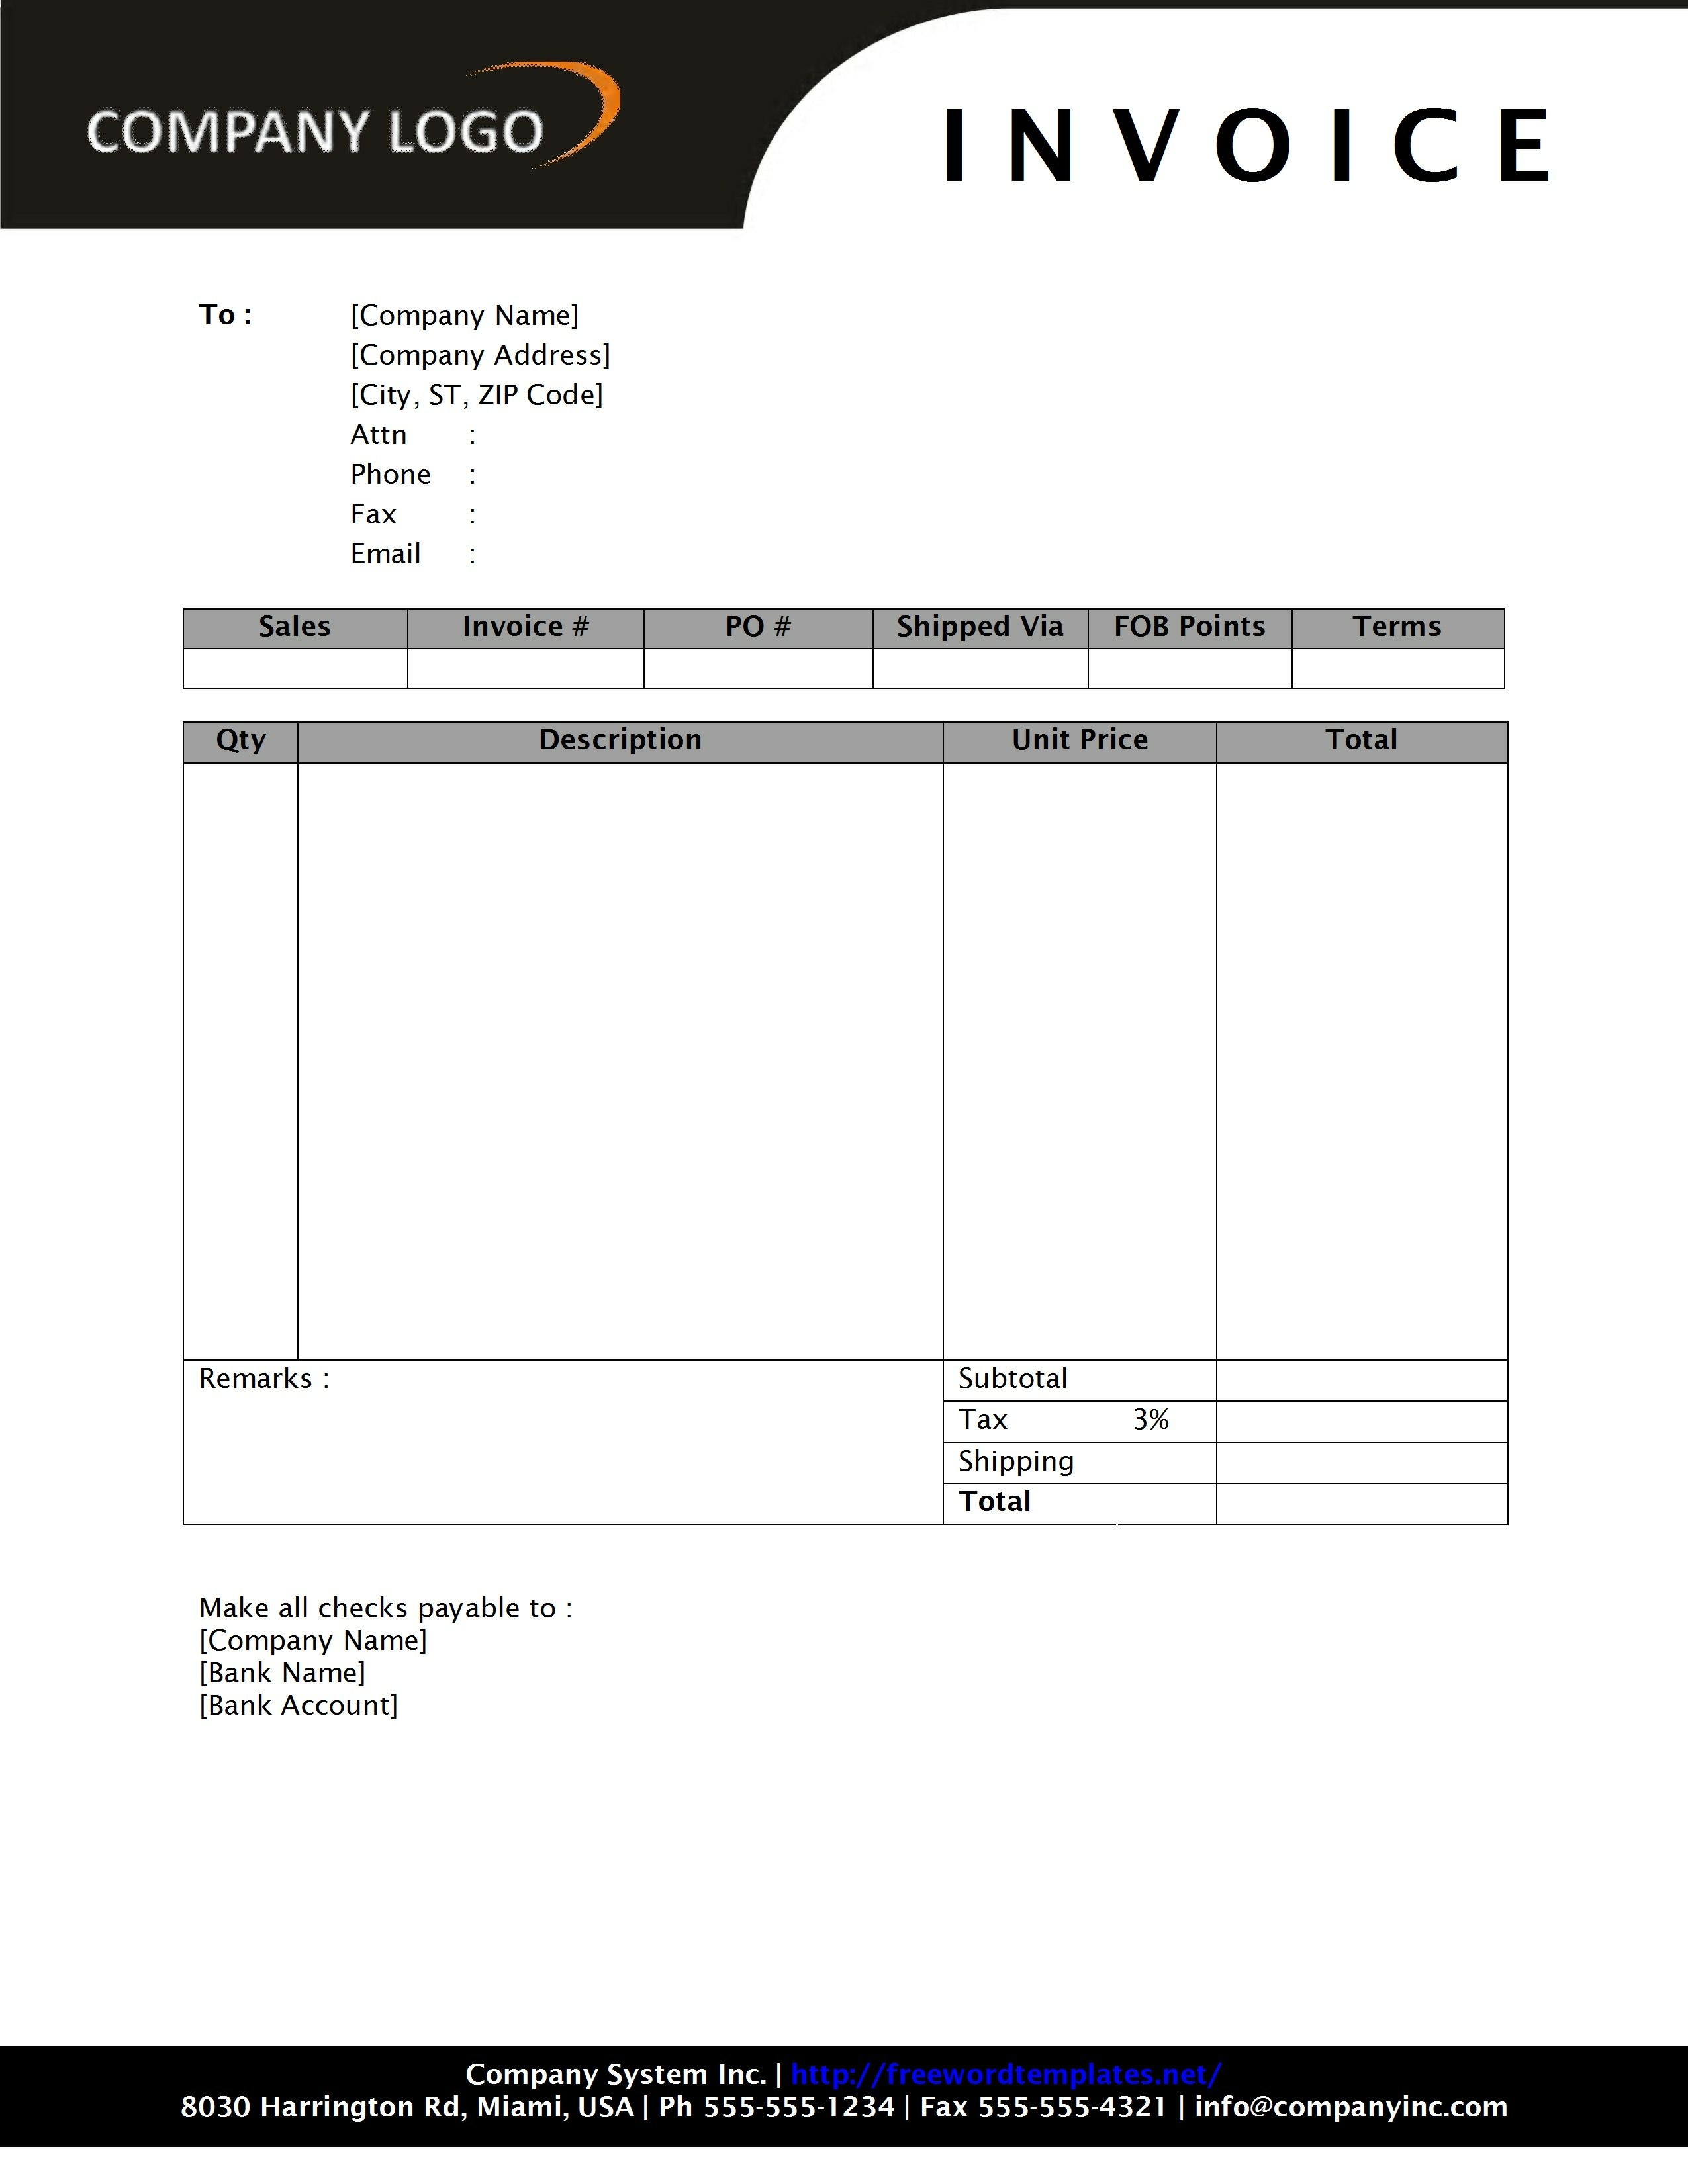 microsoft word invoice template 2010 free business template business invoice template word